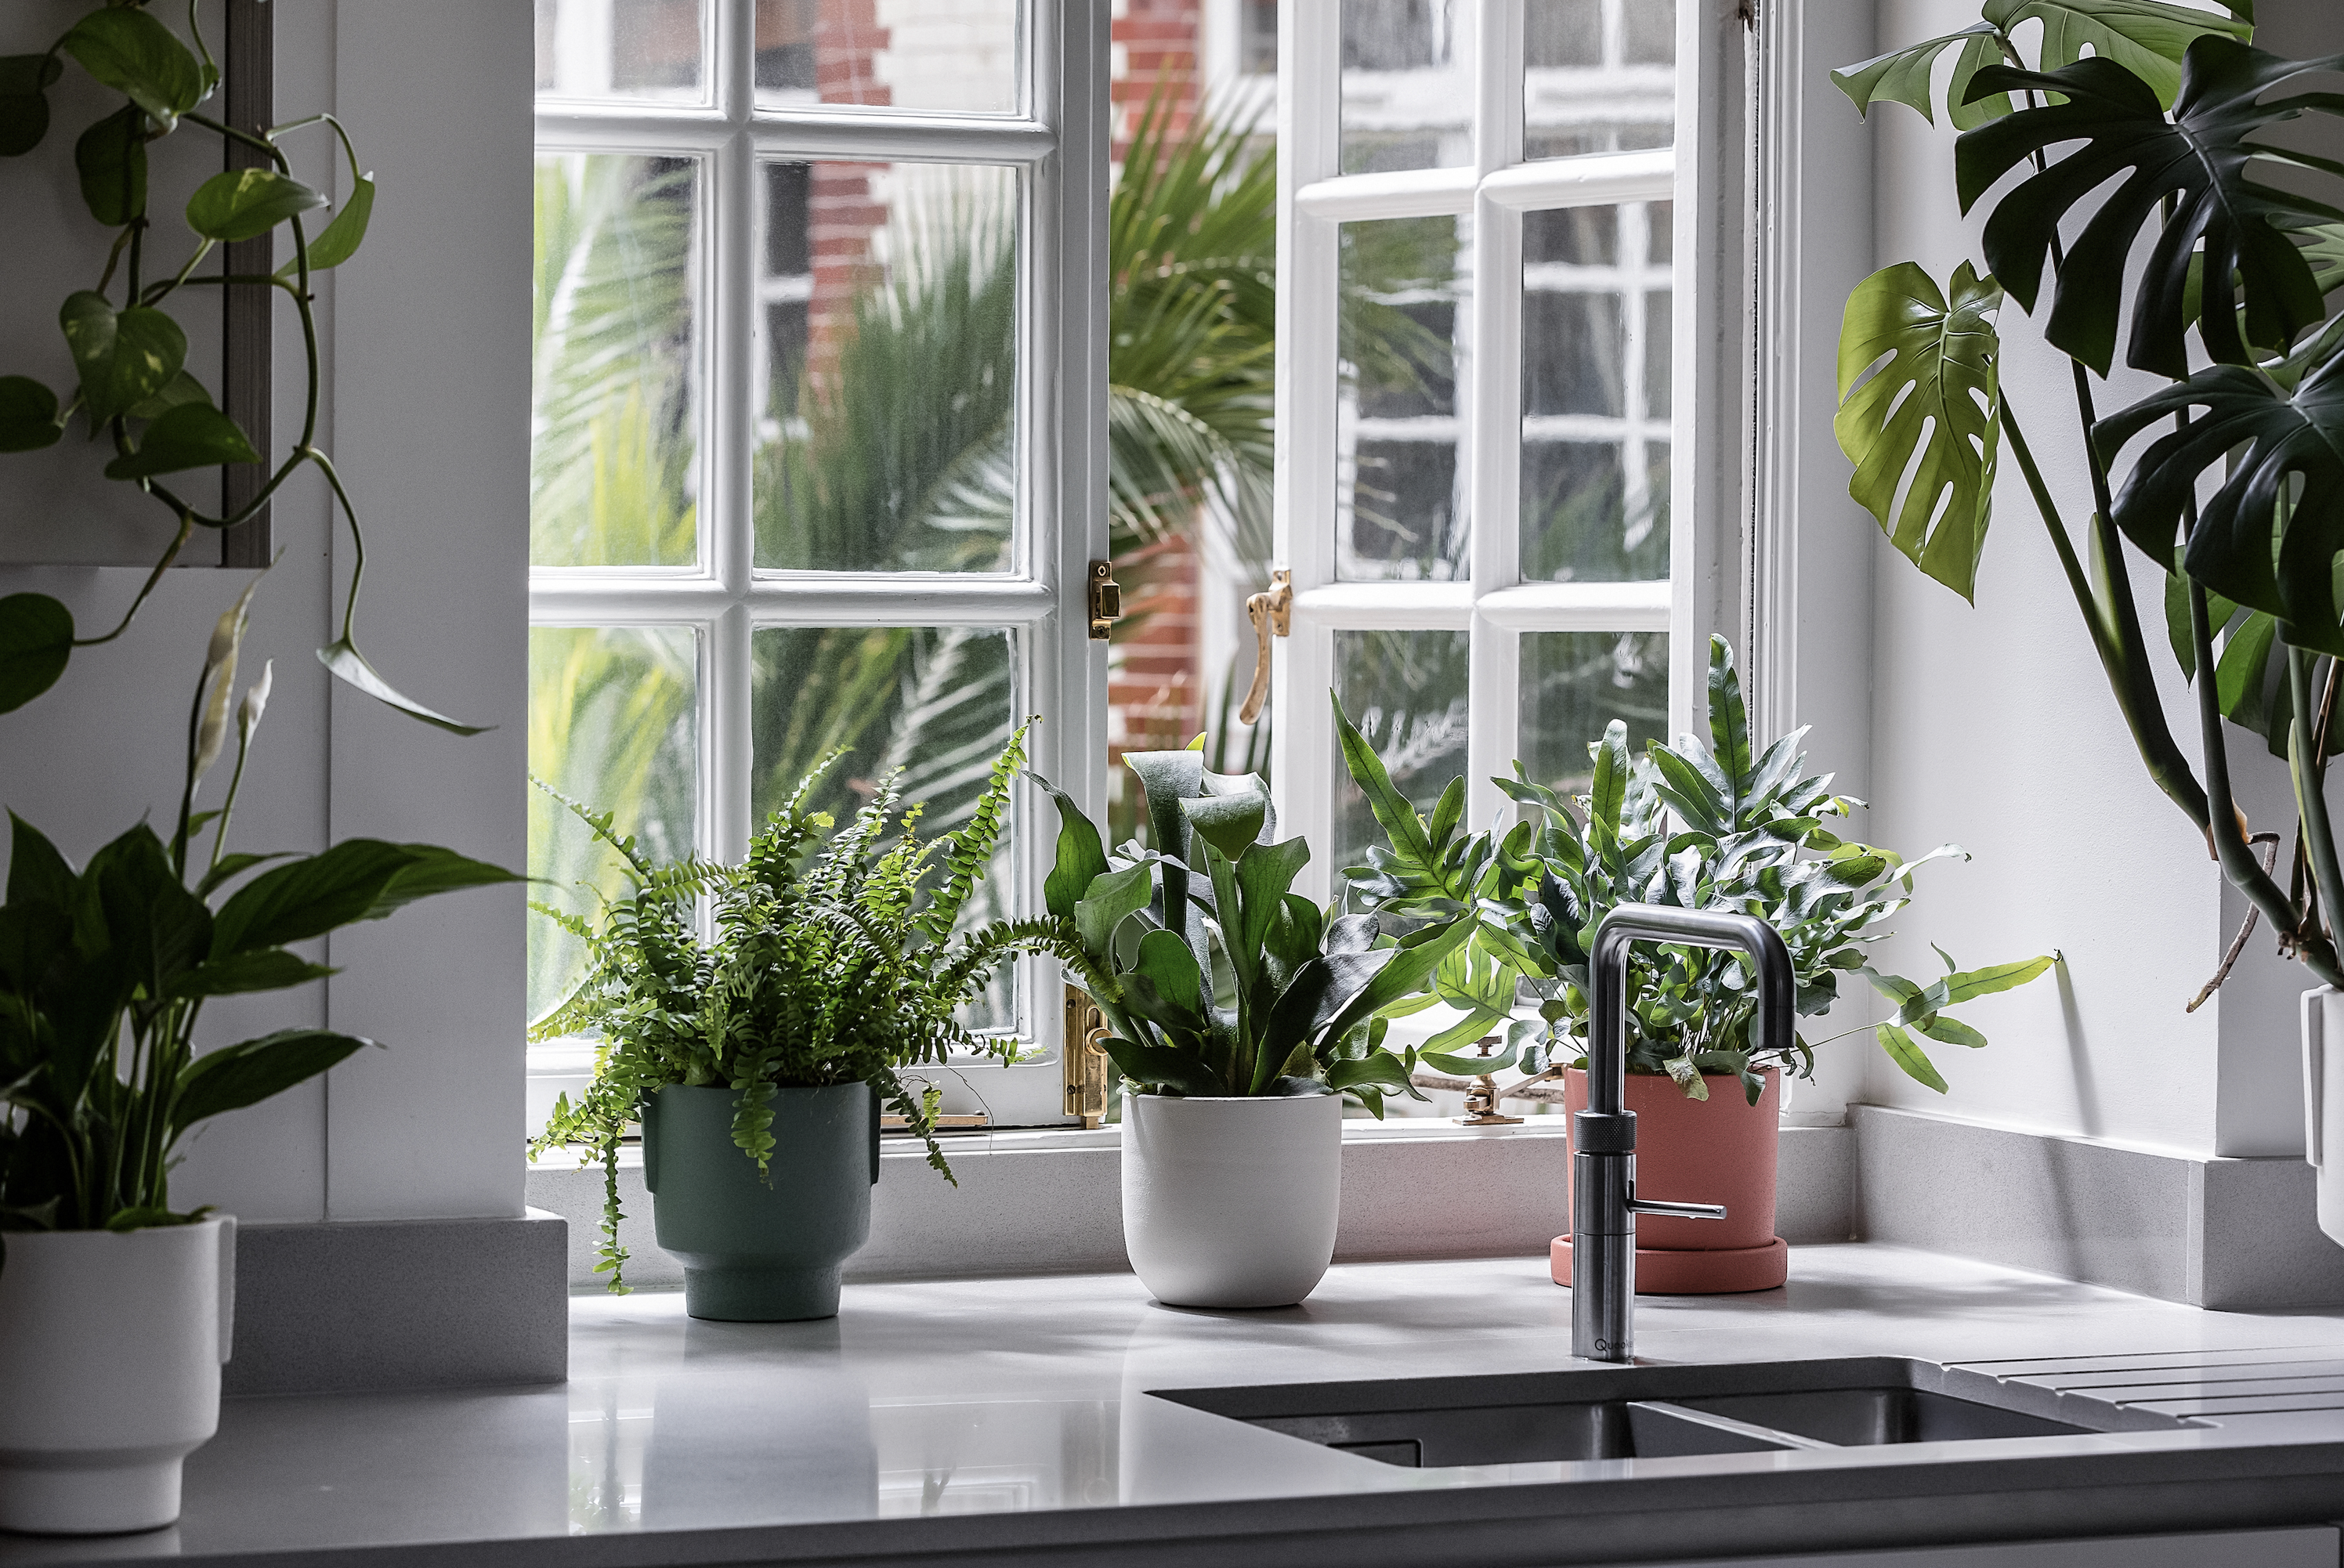 Fill your place with pot plants